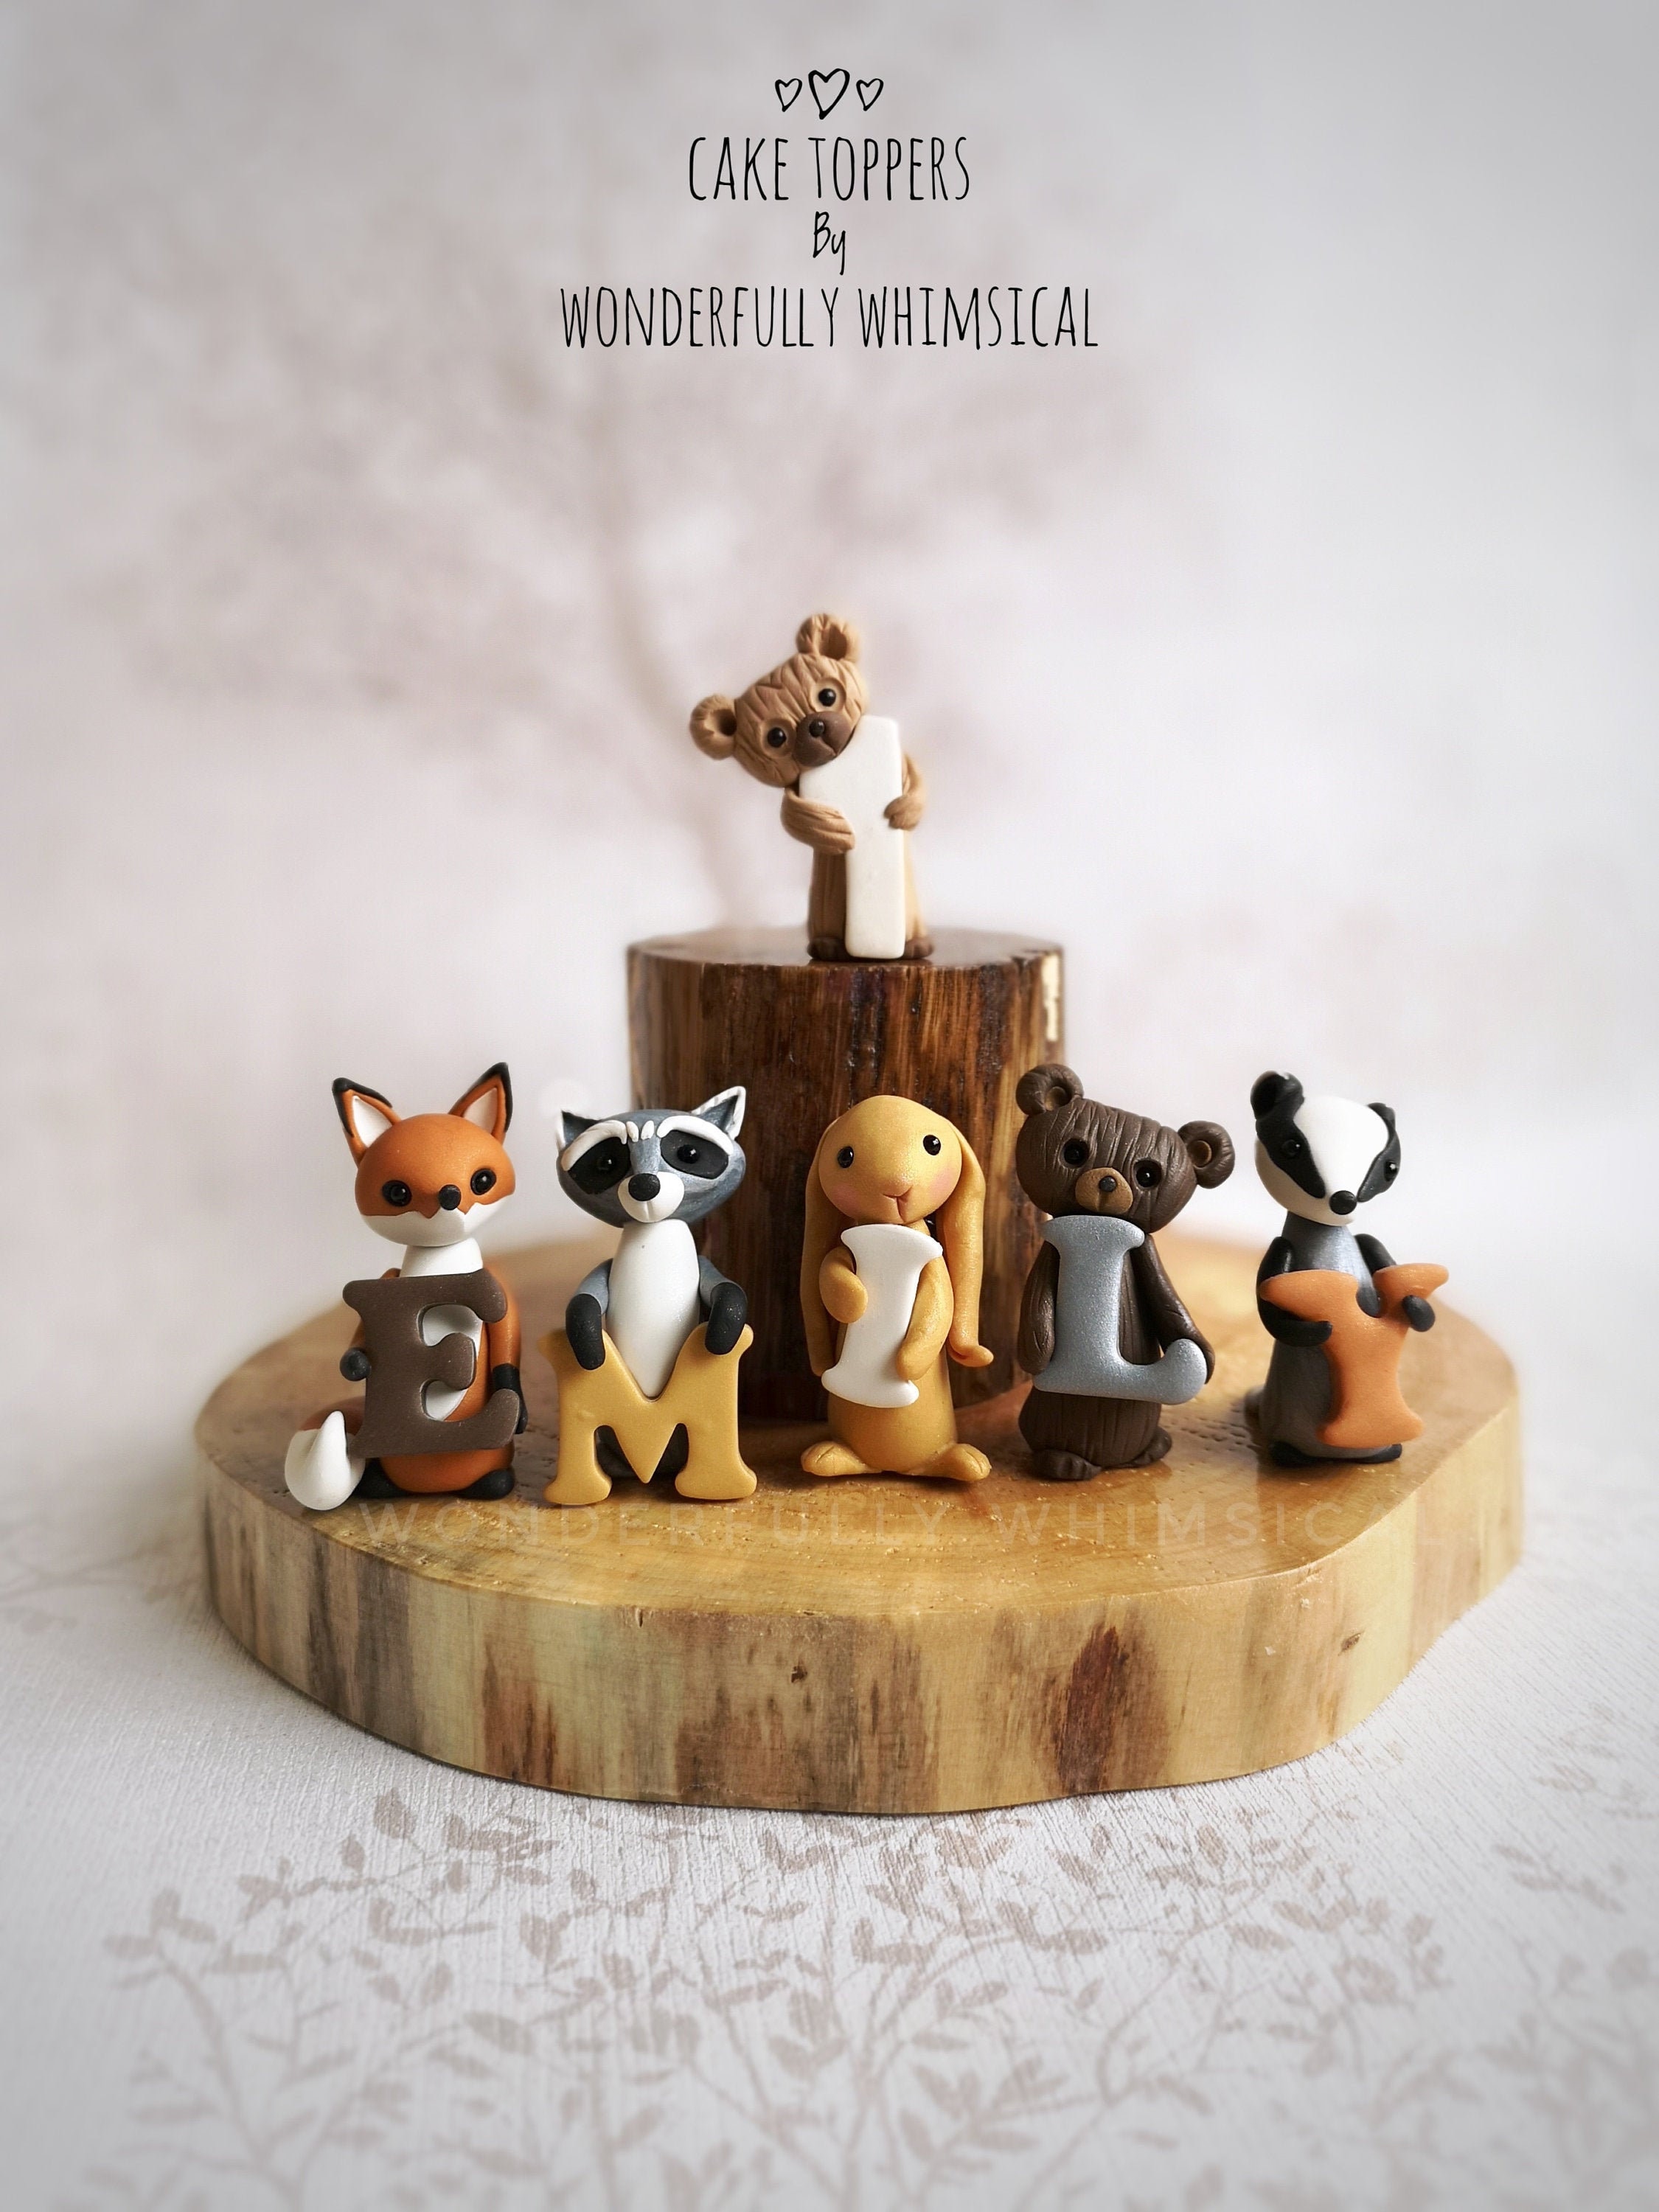 RCOMG 16pcs Forest Animal Baby Figures - Woodland Creatures Miniature Set,  Cake Toppers, Educational Birthday Gifts for Kids & Toddlers